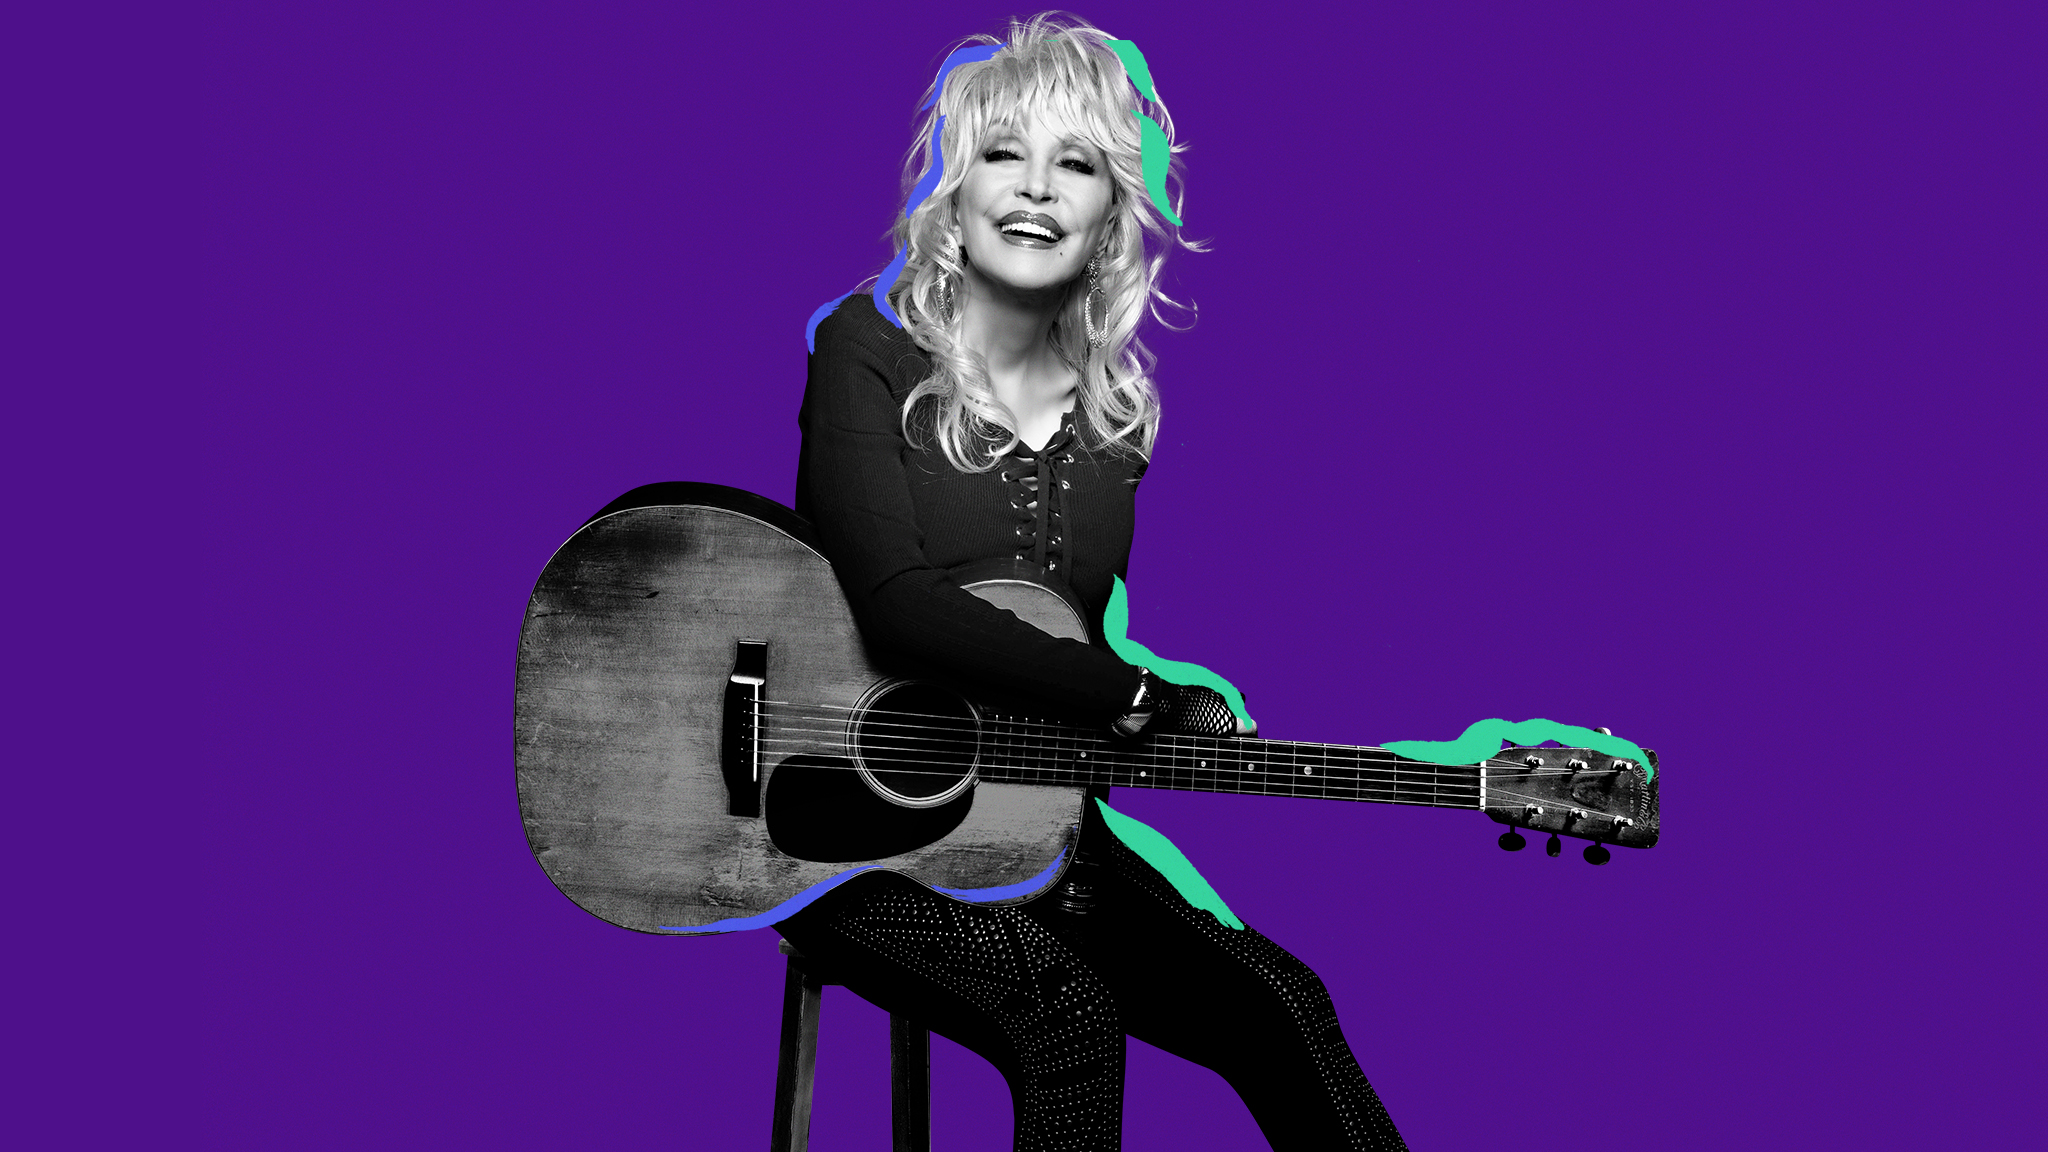 Biography: Dolly